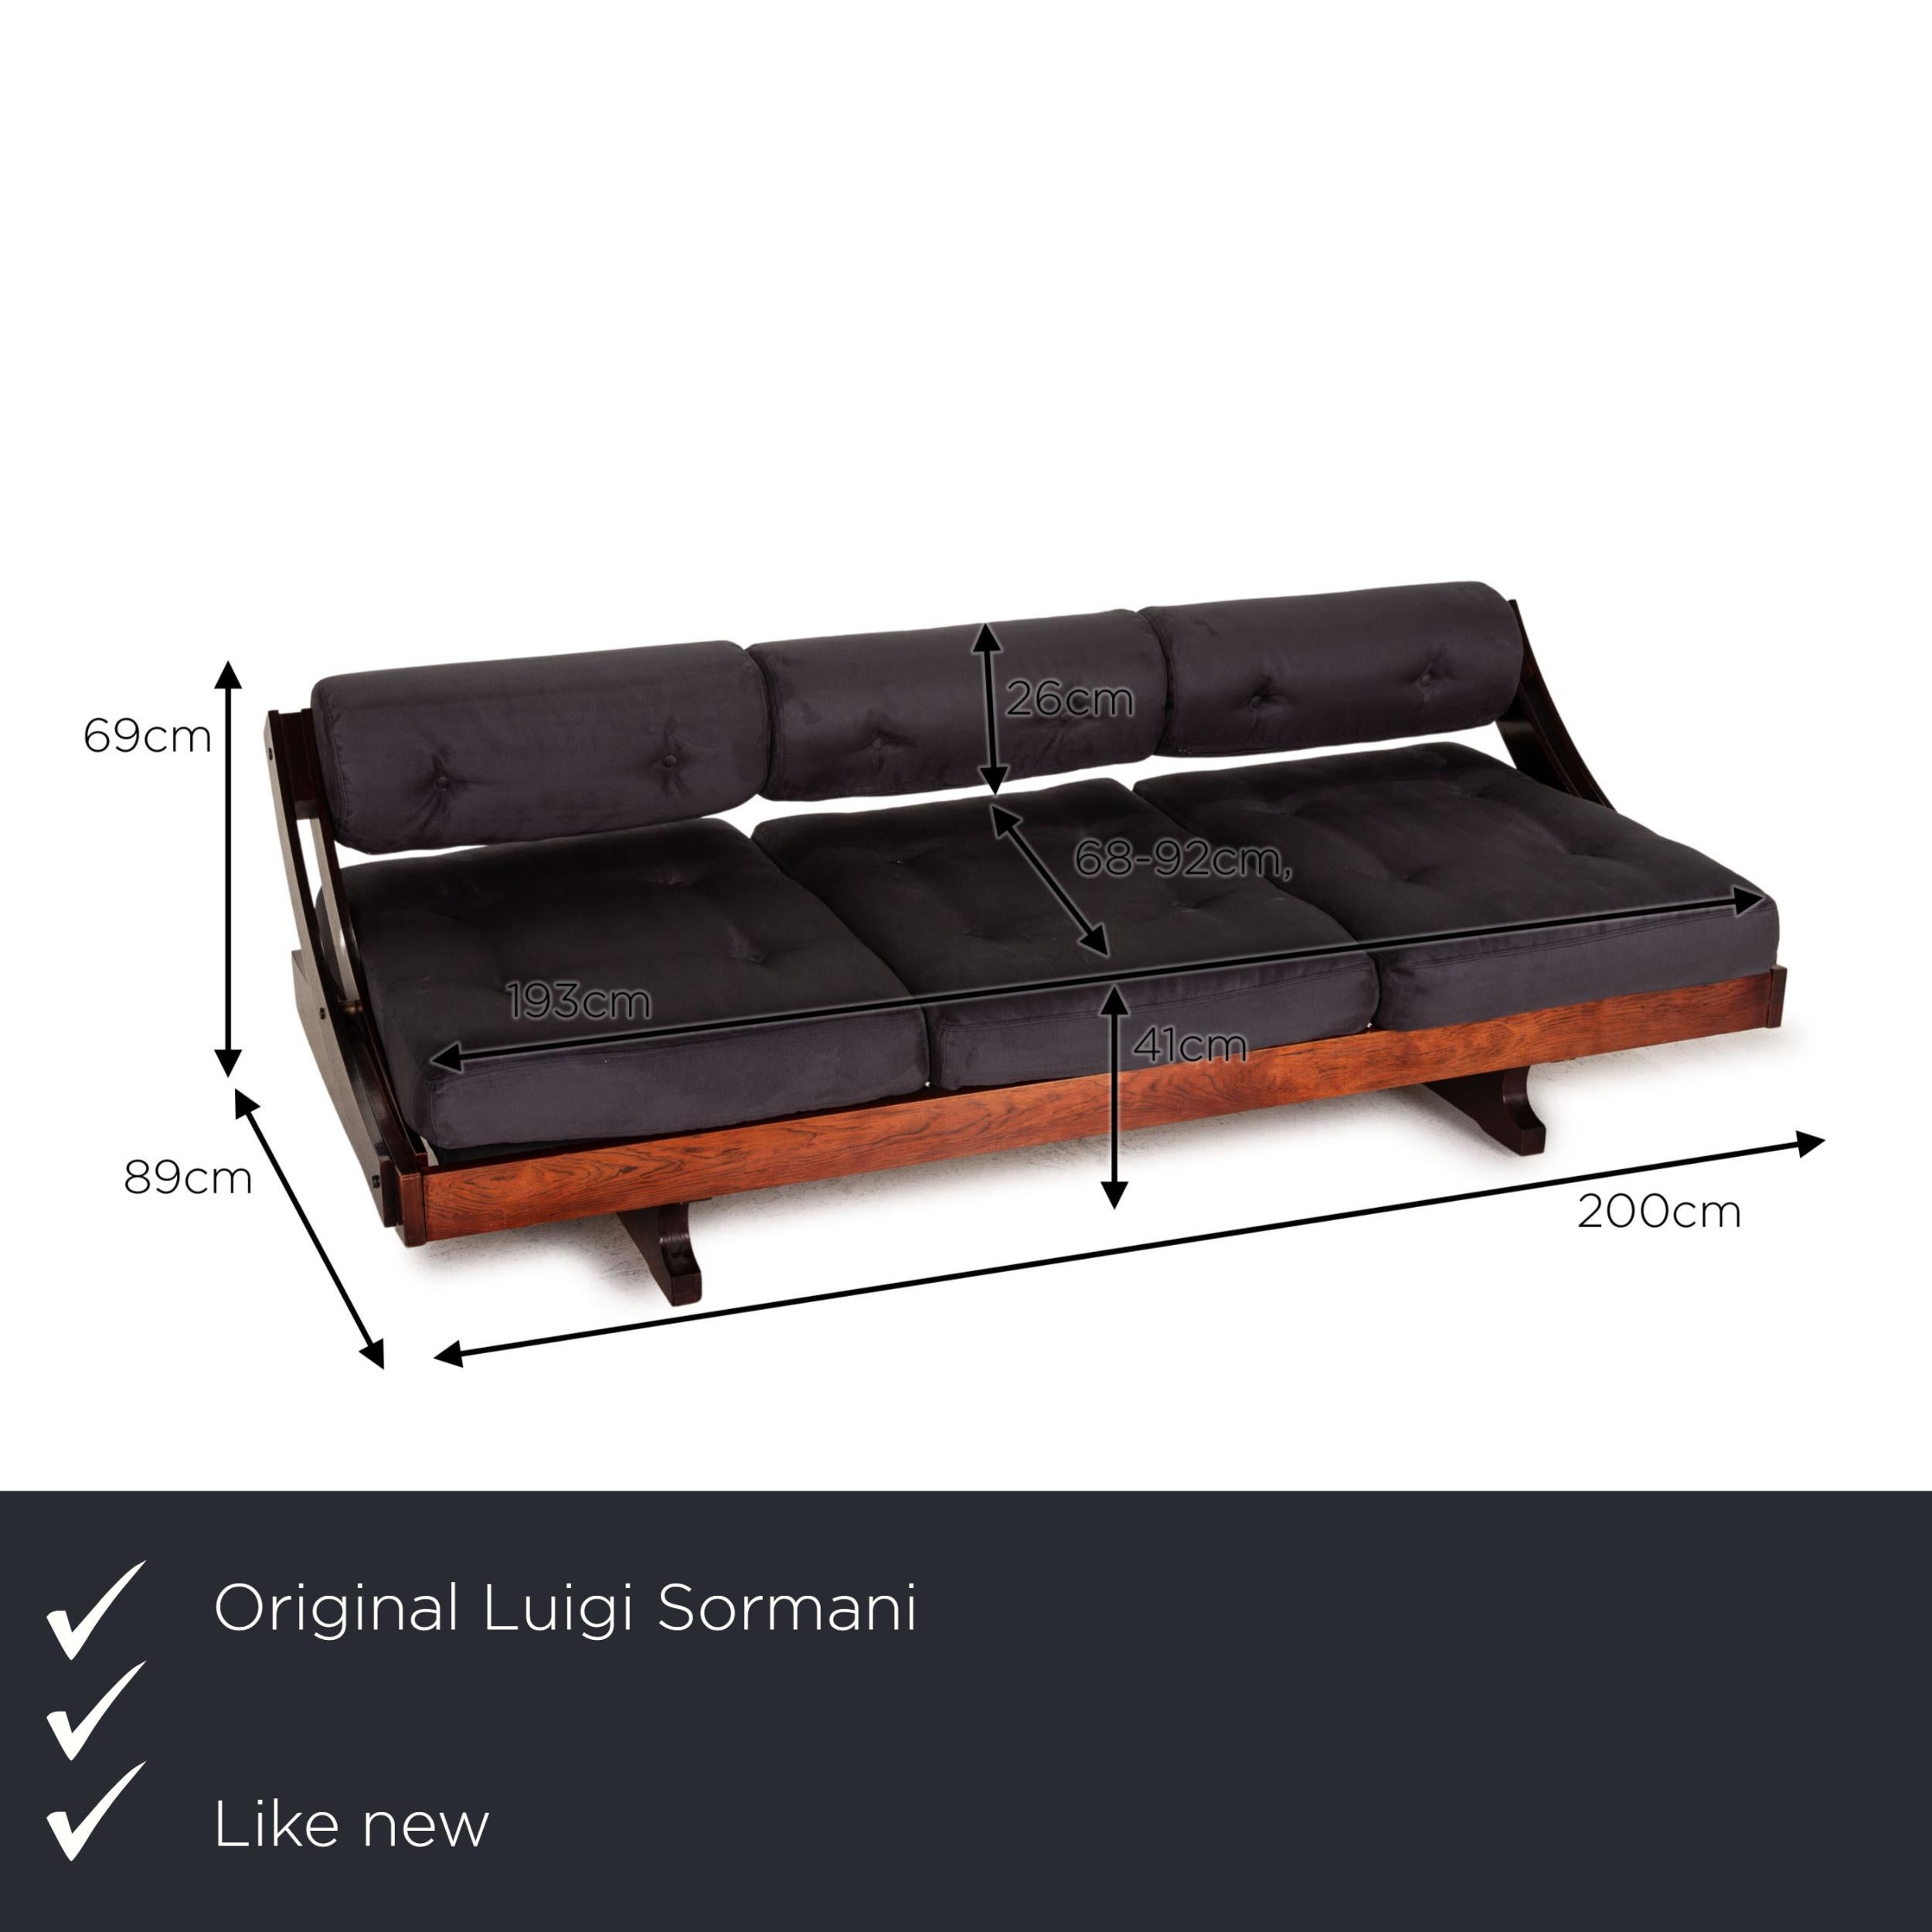 We present to you a Luigi Sormani GS195 Fabric Sofa Gray Three Seater Daybed Couch.
 SKU: #16810-c5
 

 Product measurements in centimeters:
 

 depth: 89
 width: 200
 height: 69
 seat height: 41
 rest height: 
 seat depth: 68
 seat